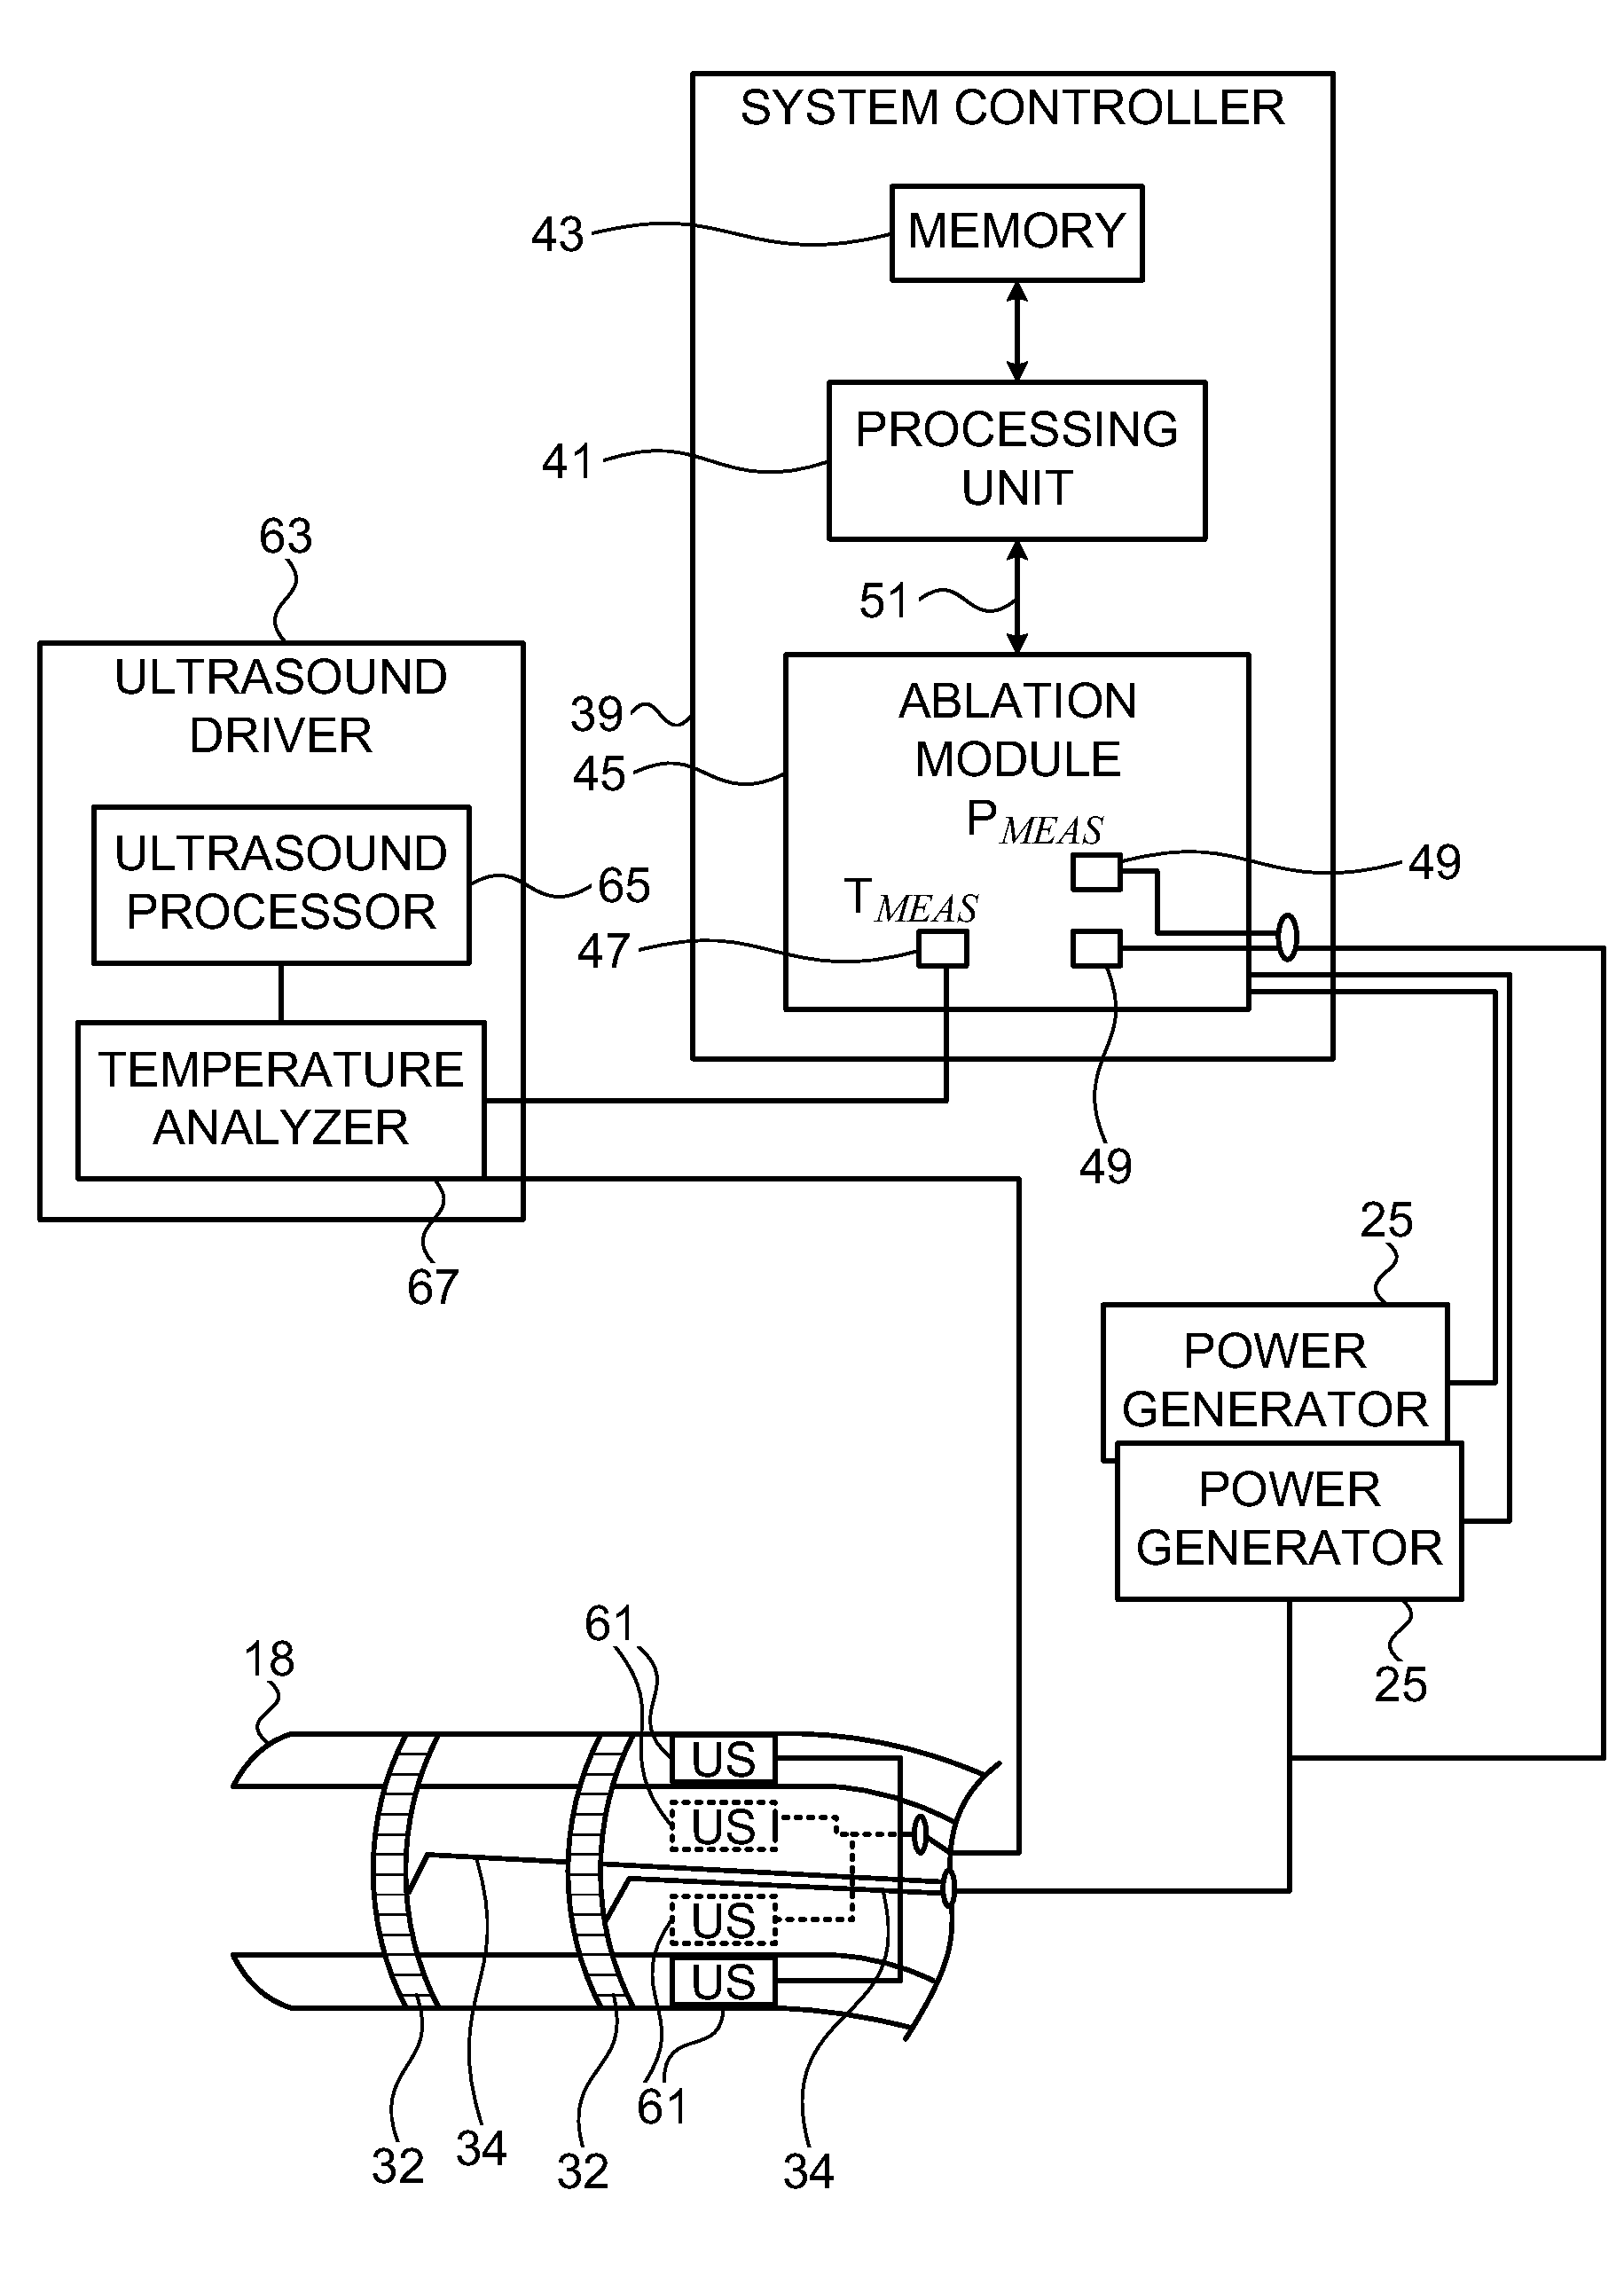 System for controlling tissue ablation using temperature sensors